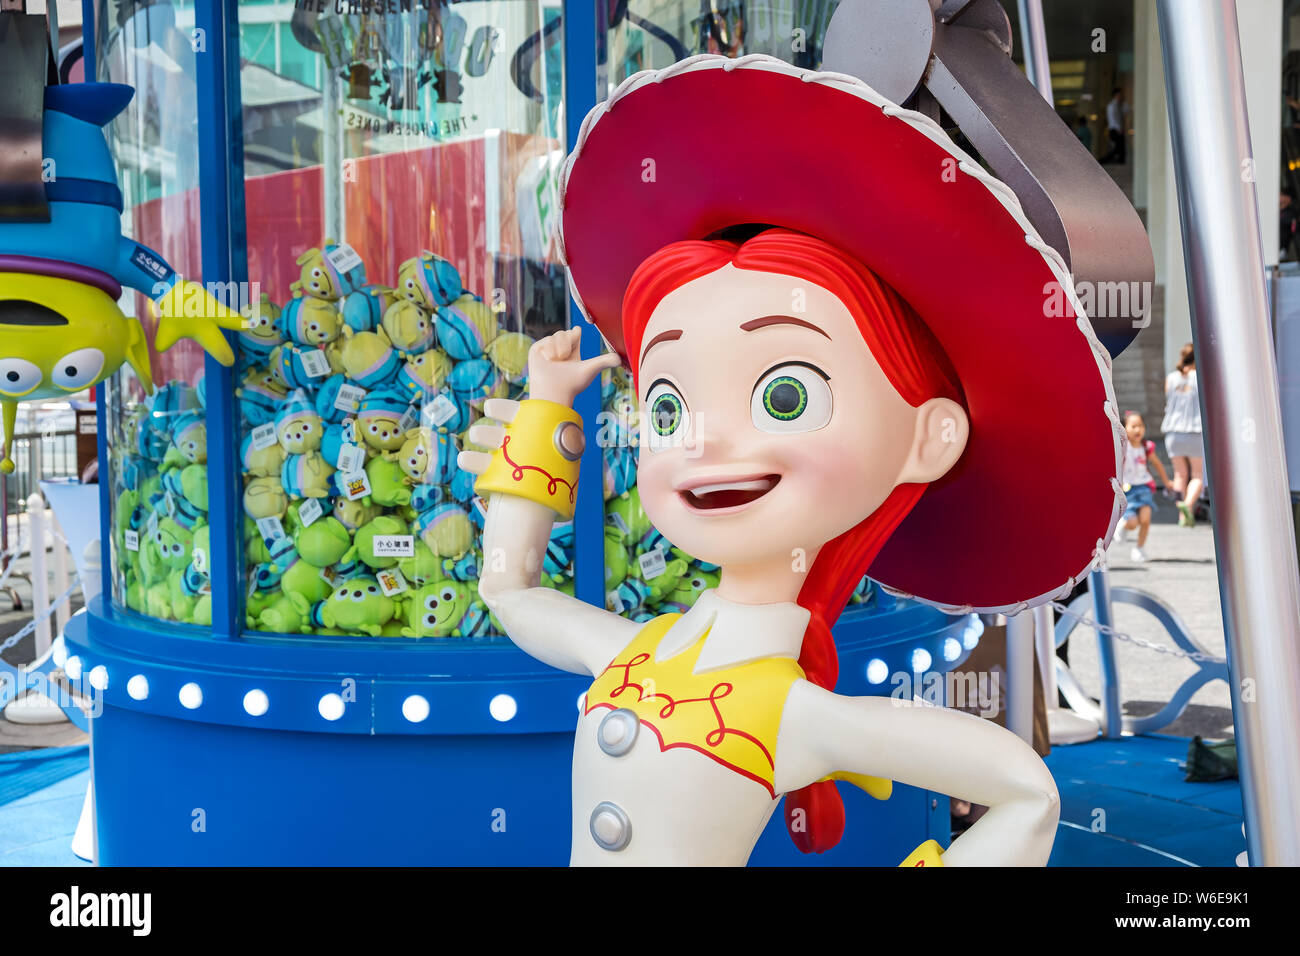 A replica of Jessie seen during the Carnival.Toy Story 4 is celebrated with a themed carnival of different games and challenges at Hong Kong Harbour City. Stock Photo